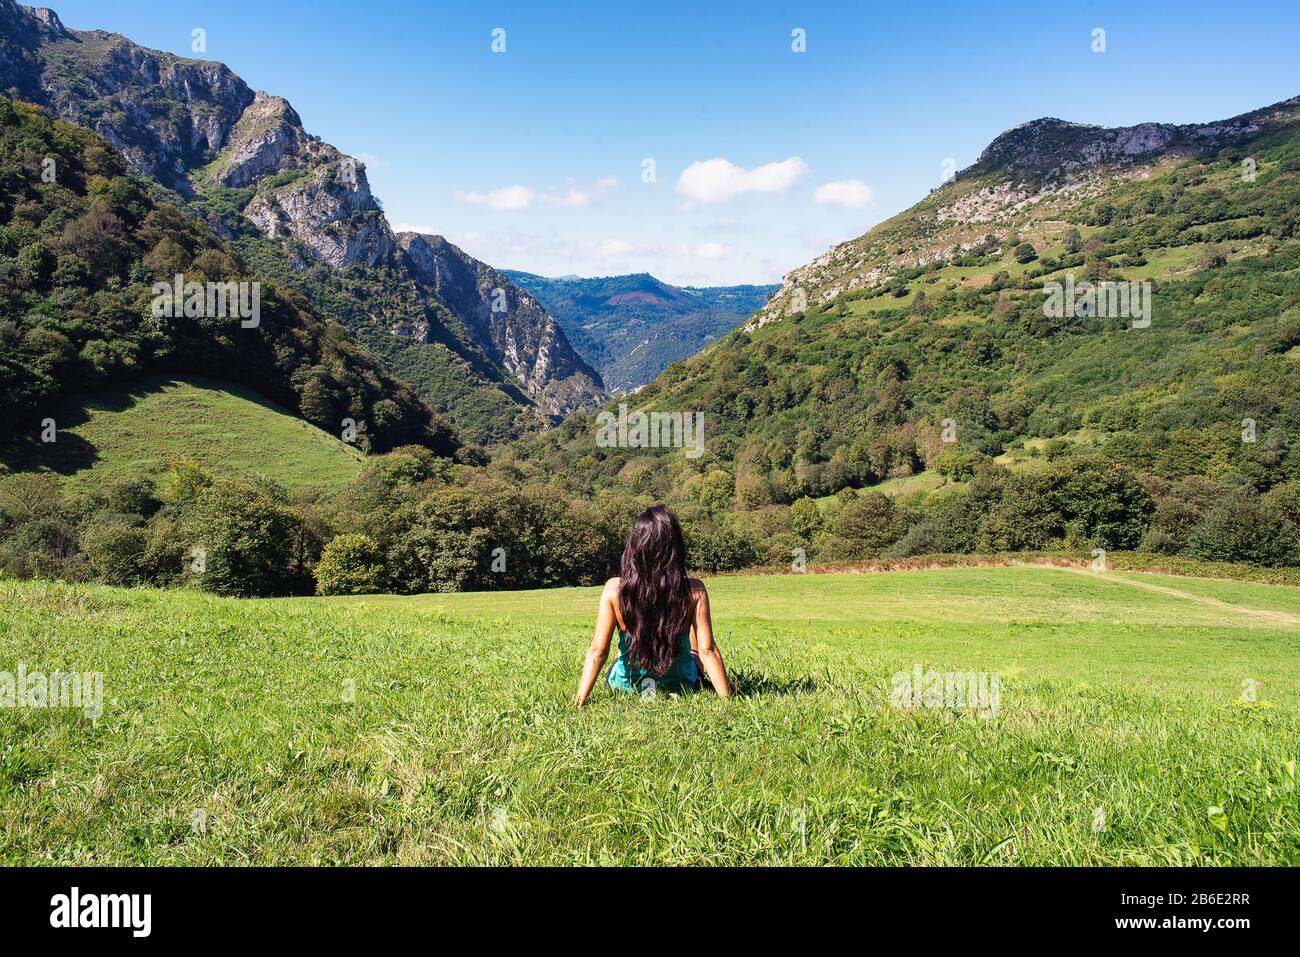 Landscape of woman in mountains of Asturias, Spain Stock Photo